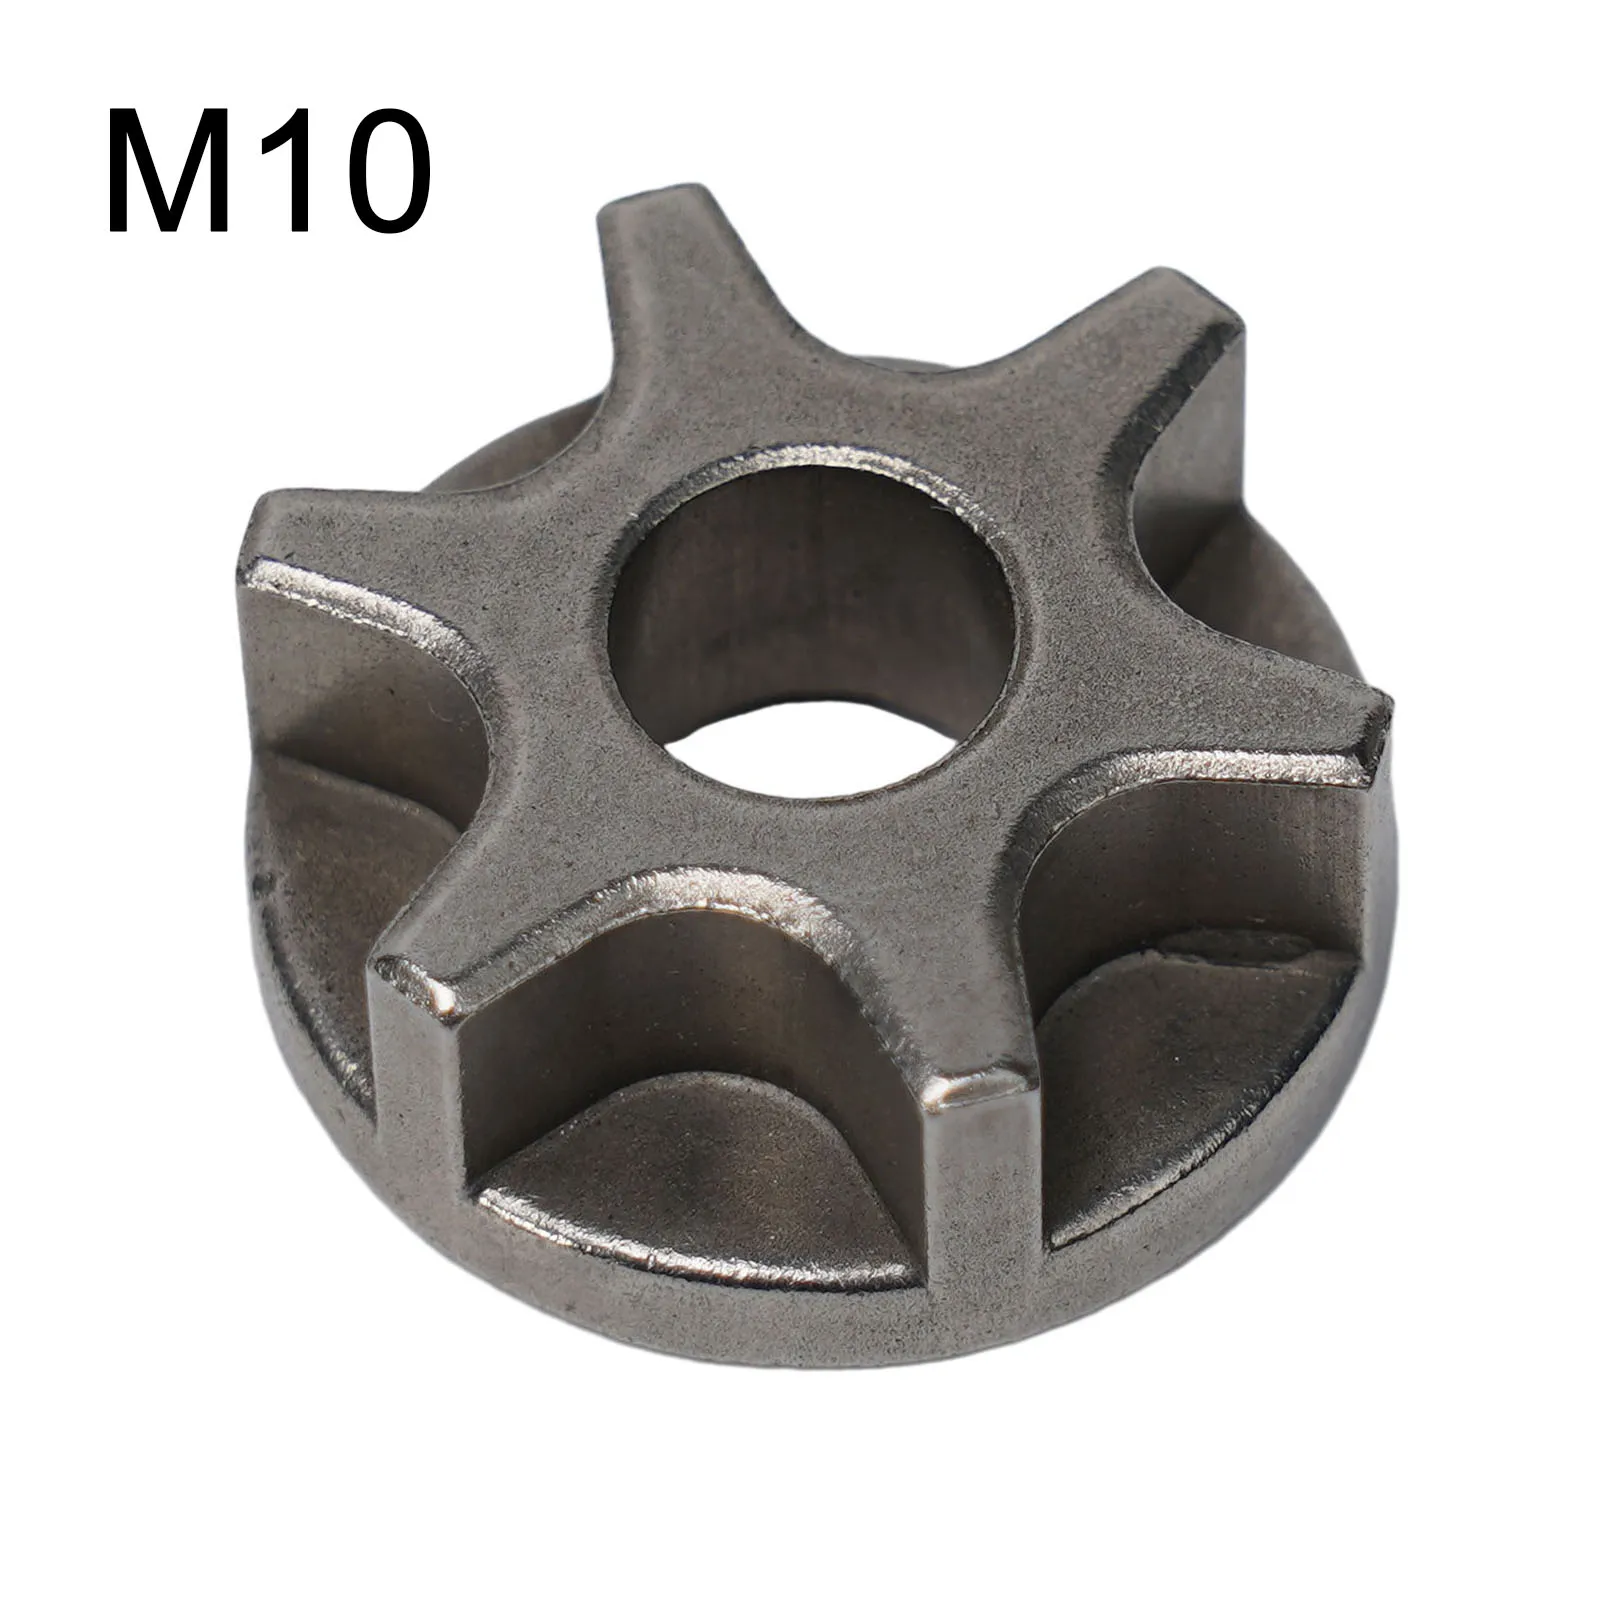 1pc M10 M14 M16 Sprocket Chain Saw Gear For 100 115 125 150 180 Angle Grinder Replacement Gear Chainsaw Bracket Part 5016 6018 electric chain saw sprocket 7 6 3 teeth angle grinder chainsaw gear